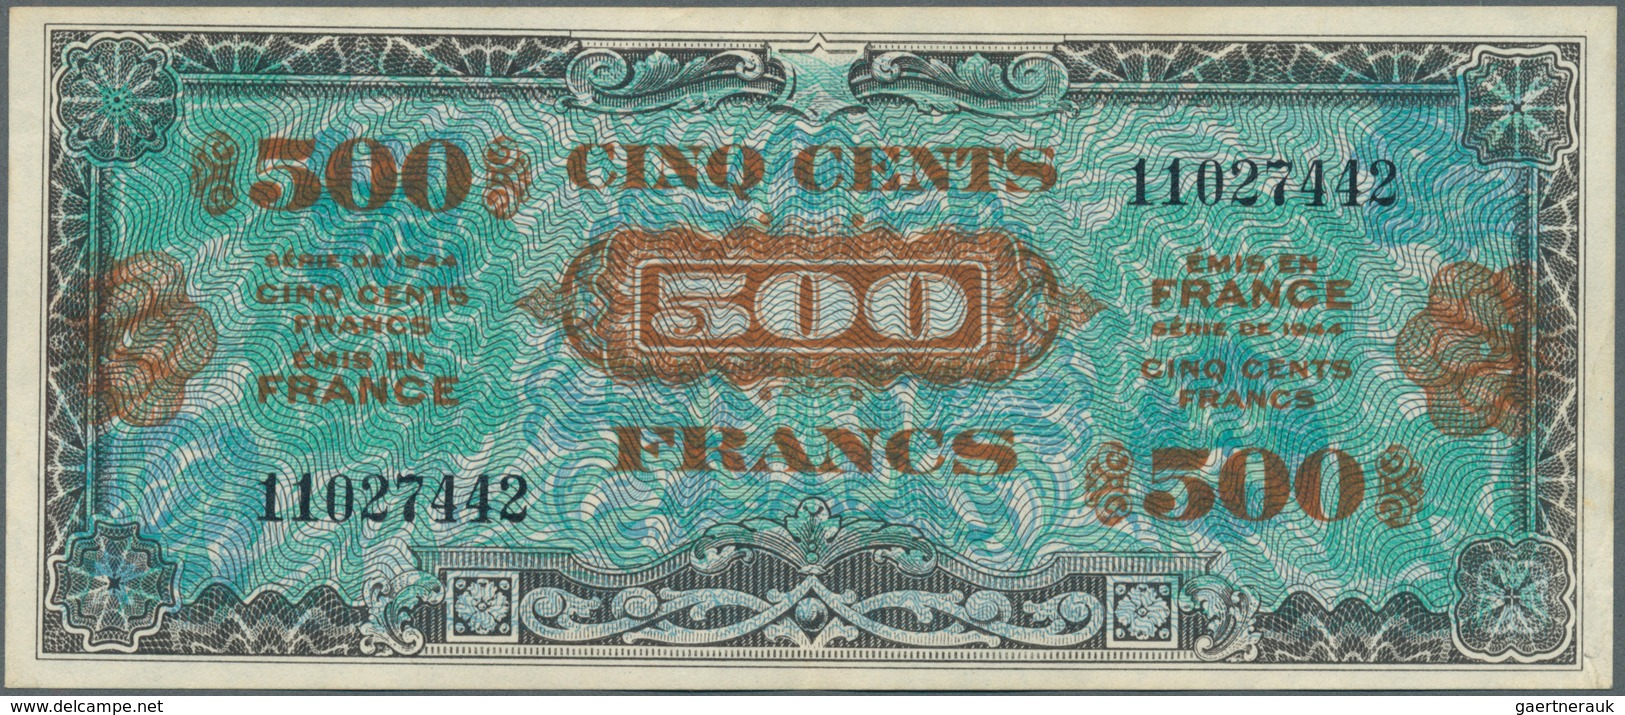 France / Frankreich: 500 Francs 1944 P. 119a, Light Center Fold And Minor Handling In Paper, No Hole - 1955-1959 Sovraccarichi In Nuovi Franchi